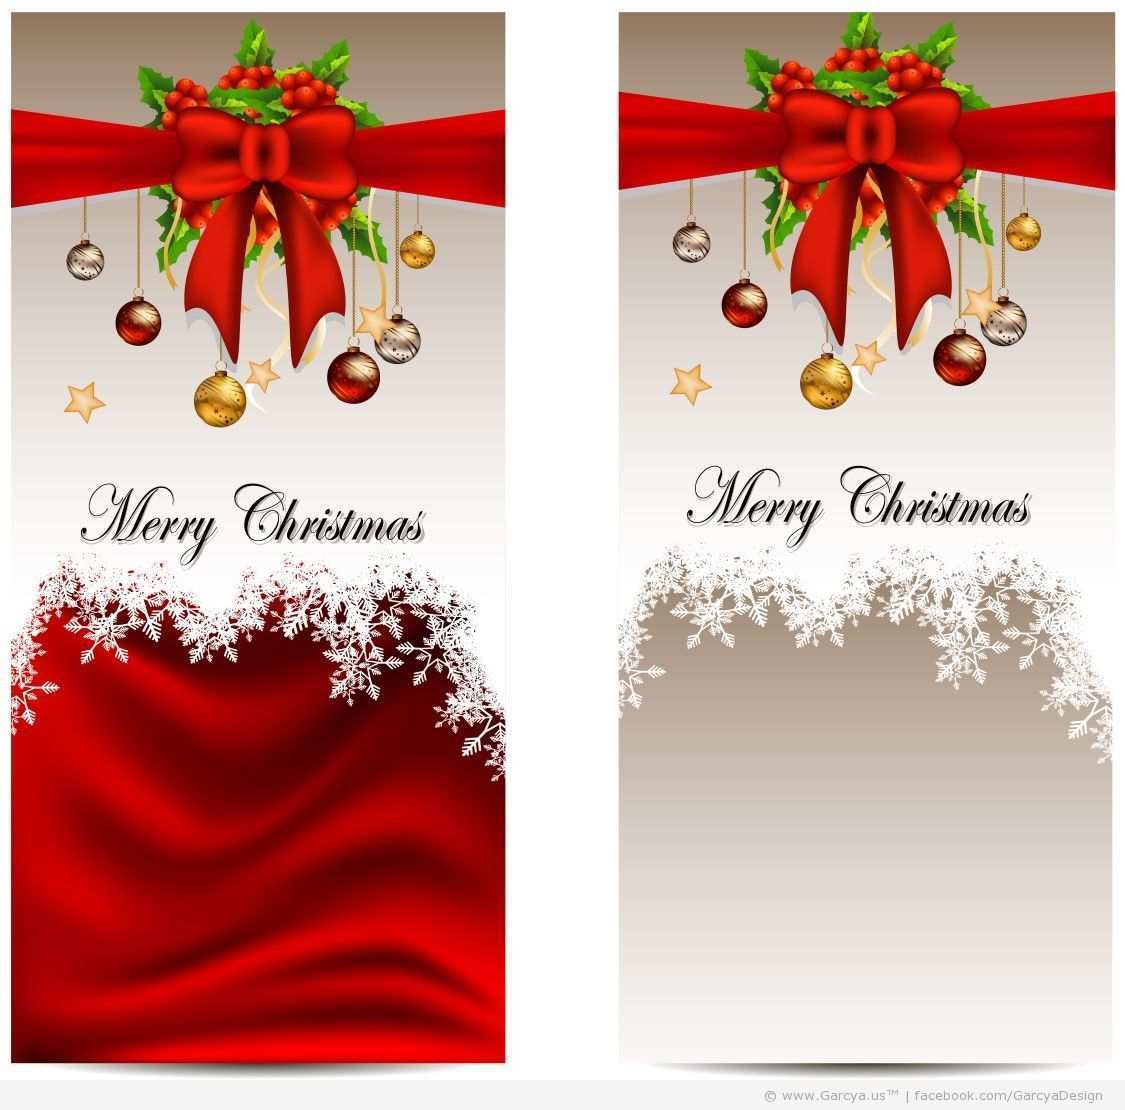 32 Best Christmas Card Templates For Free Download in Photoshop by Christmas Card Templates For Free Download